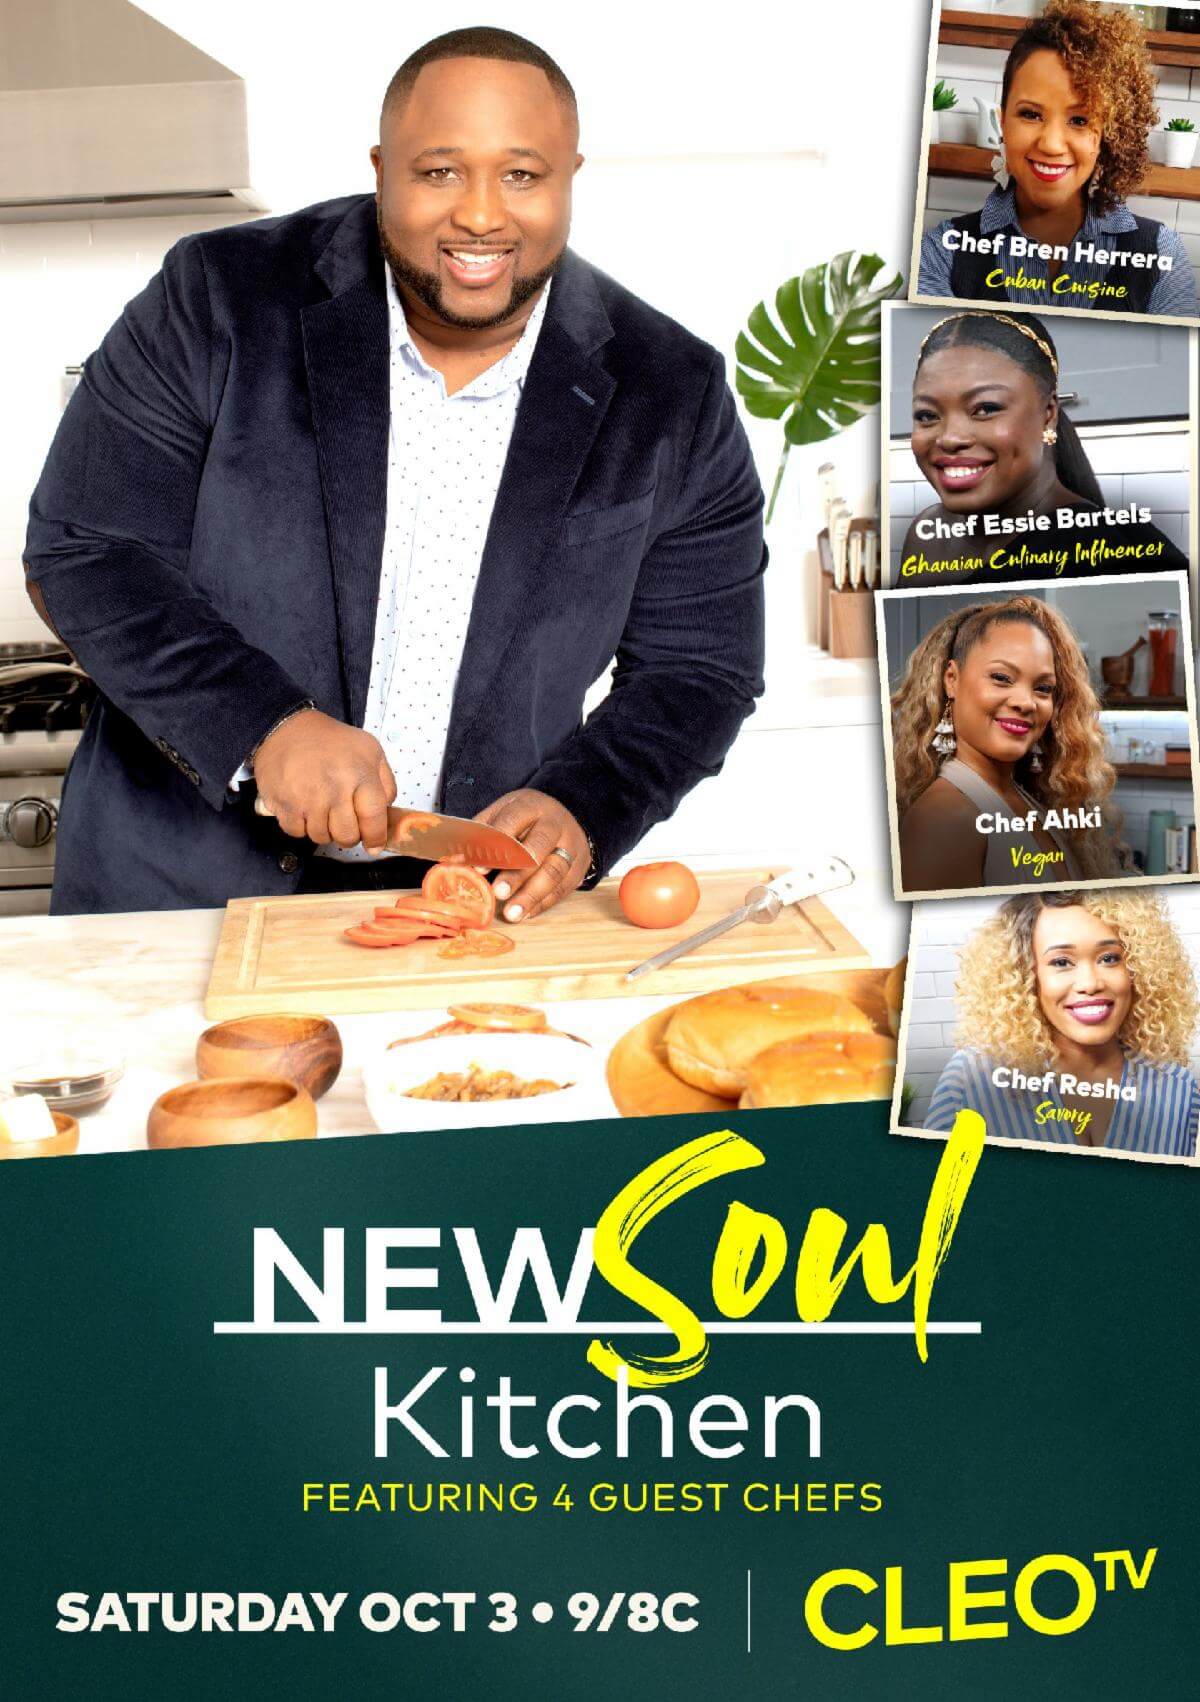 Celebrate International Chef's Day with   New Soul Kitchen's Celebrity Chef's